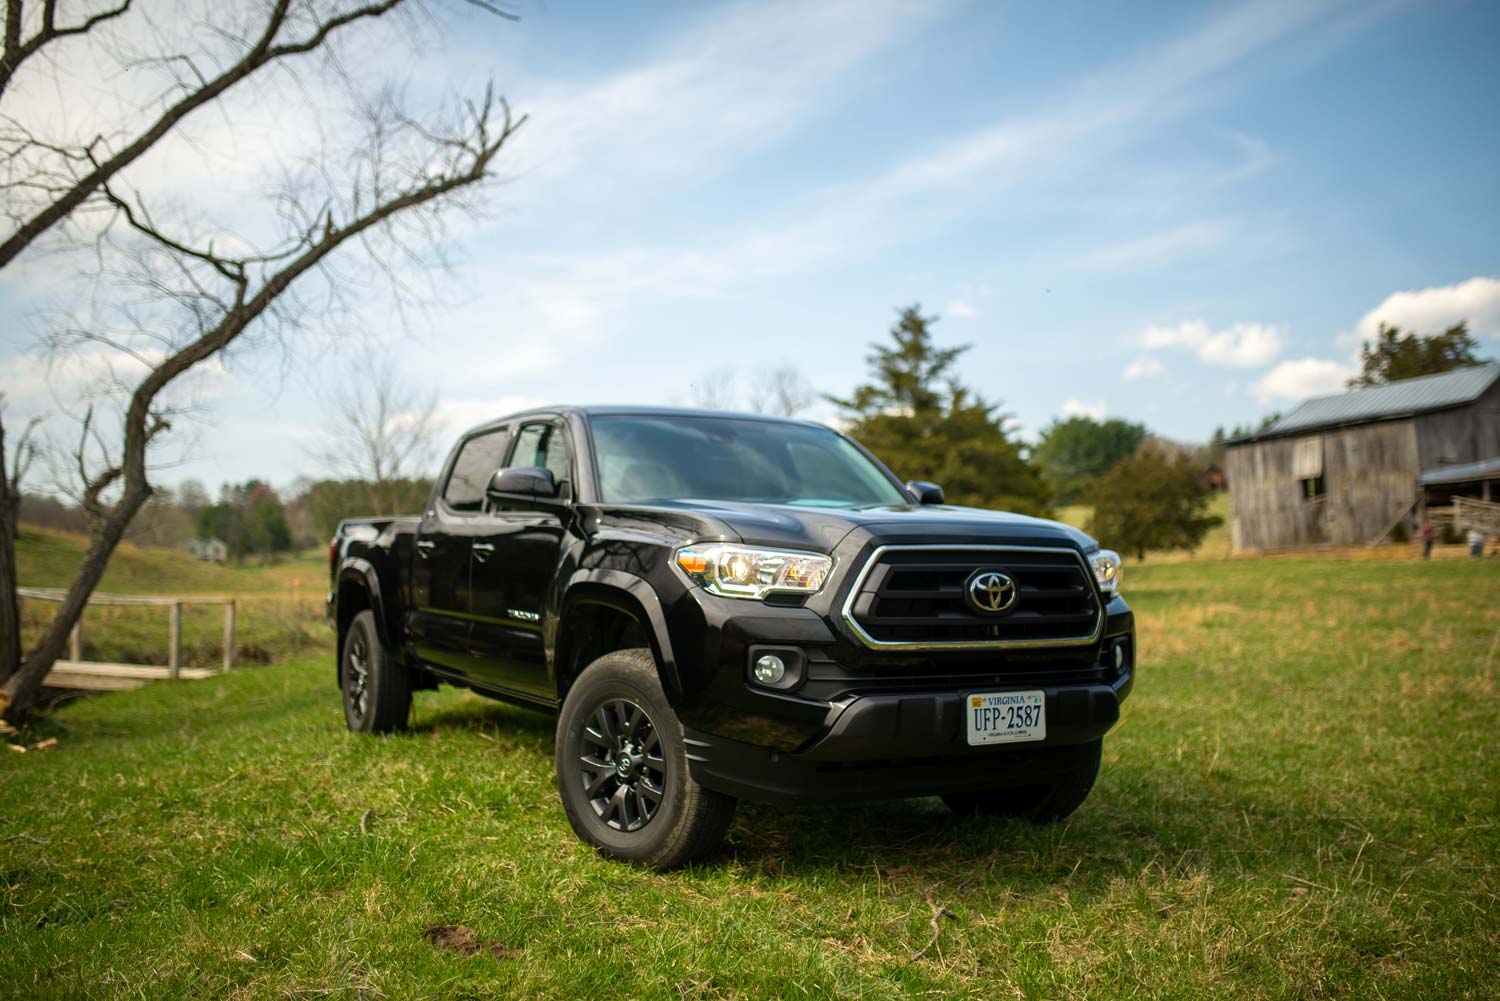 Introduce 124+ images what does sr5 mean on toyota tacoma - In